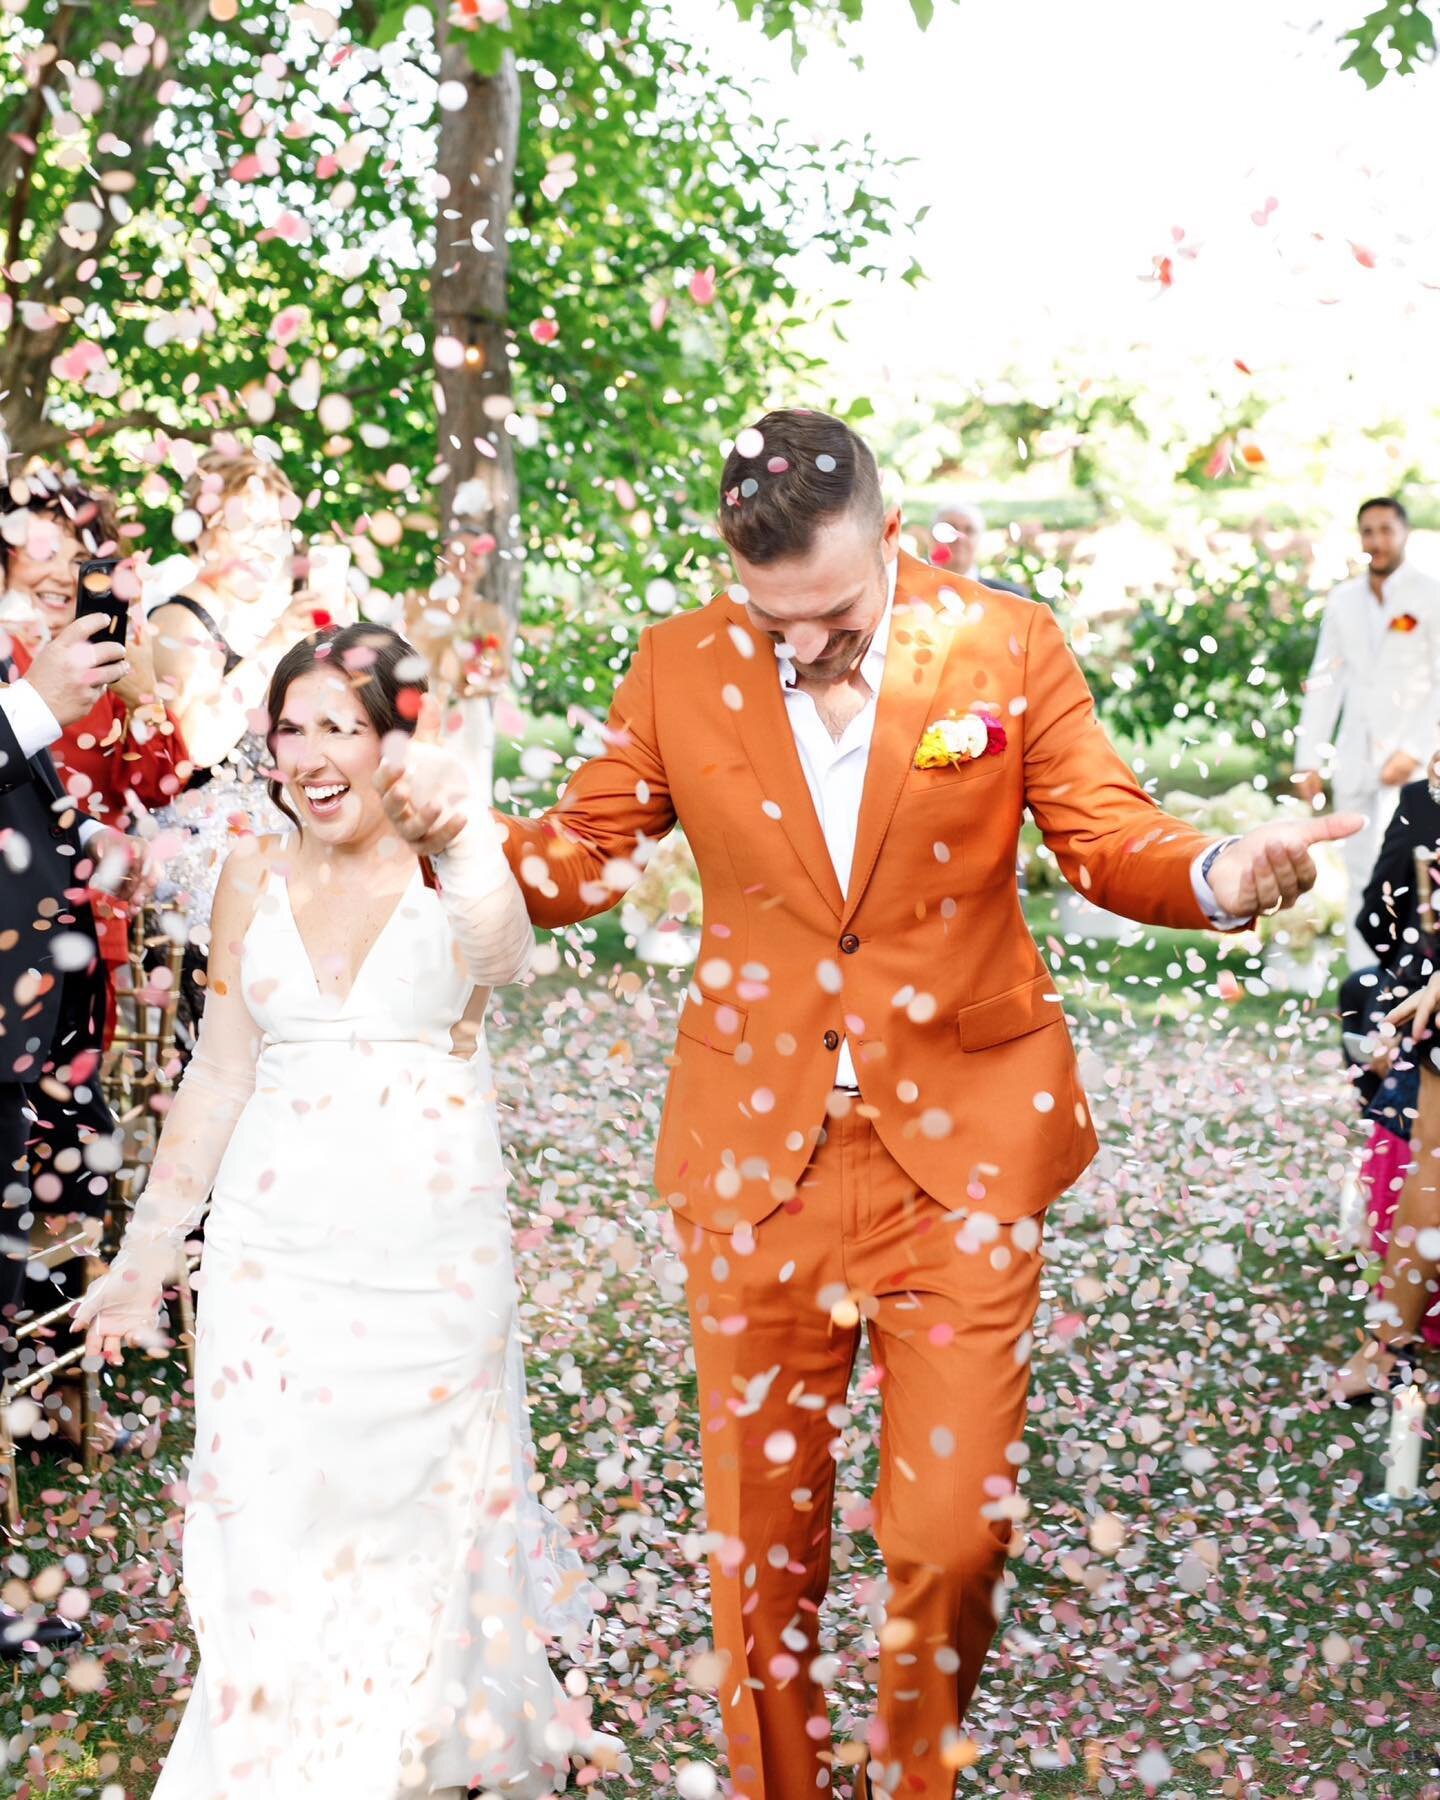 This was such a fun wedding to second shoot! Owyn and David were extremely sweet and their wedding was so colourful and vibrant. I wish more couples used confetti canons at their ceremonies, such a great moment. 

Second shot for @livishawphotography